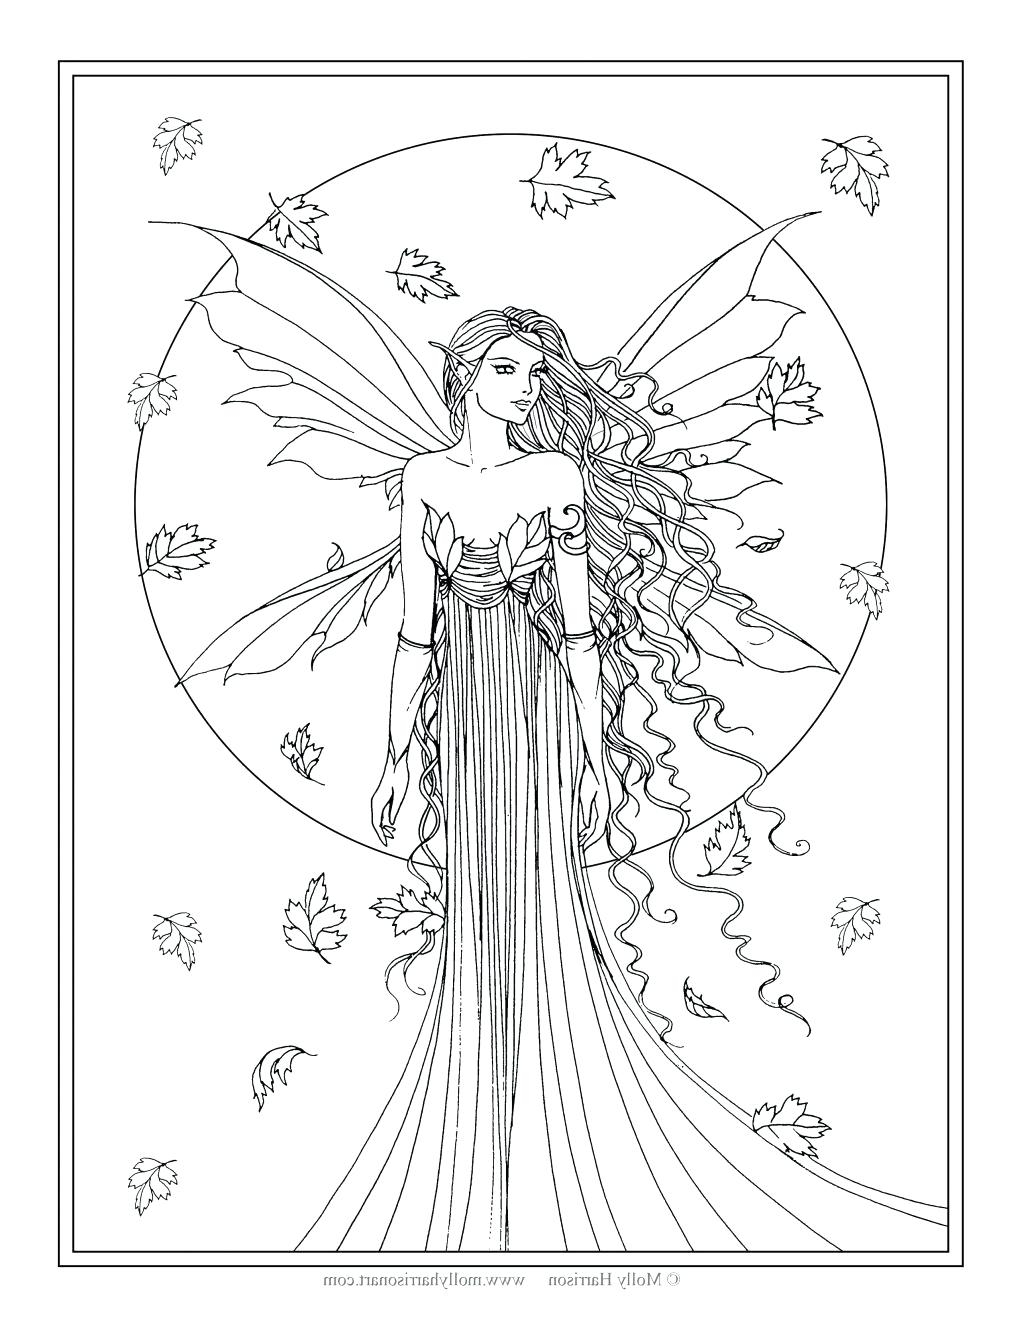 Free Coloring Pages Of Fairies Fairies Coloring Sheets Amicuscolorco